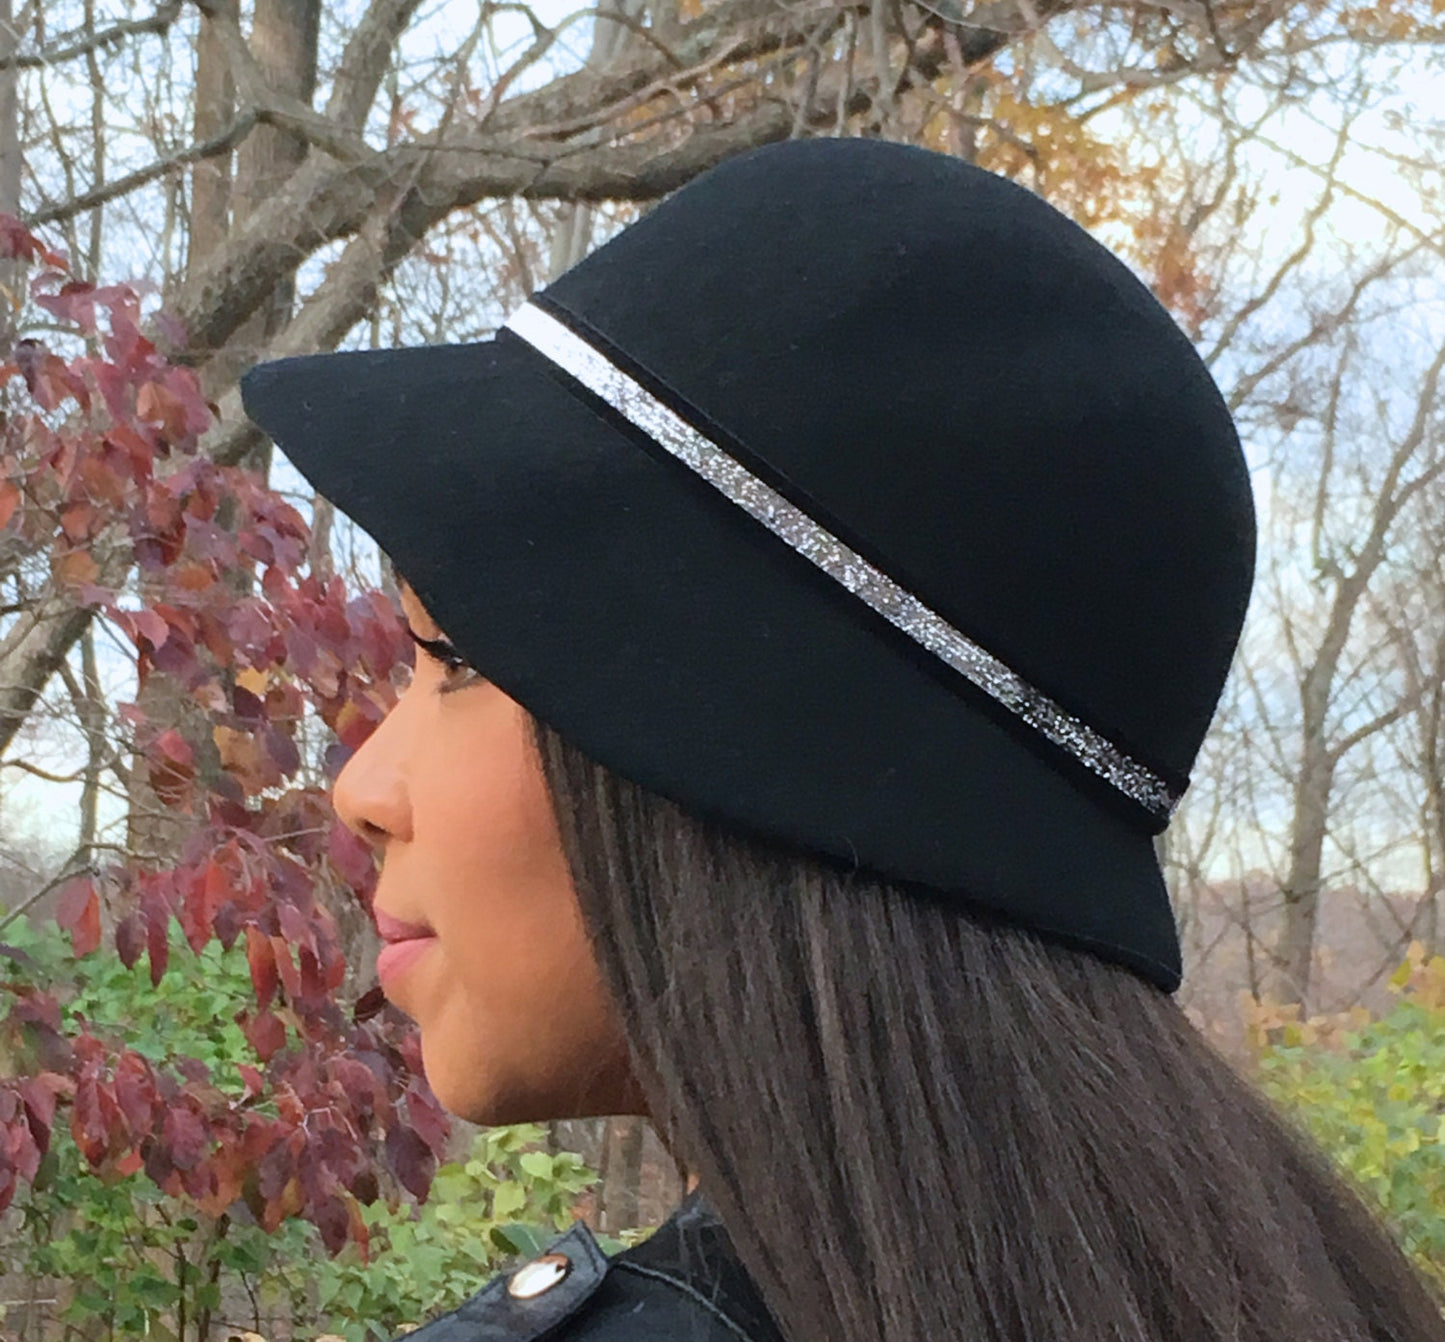 Black wool Cloche hat with Silver Metallic trim-Winter hat-Christmas-Polo-Winter Race- Holiday Party-Chruch Hat-Gift Hat-Teen Woman Hat!